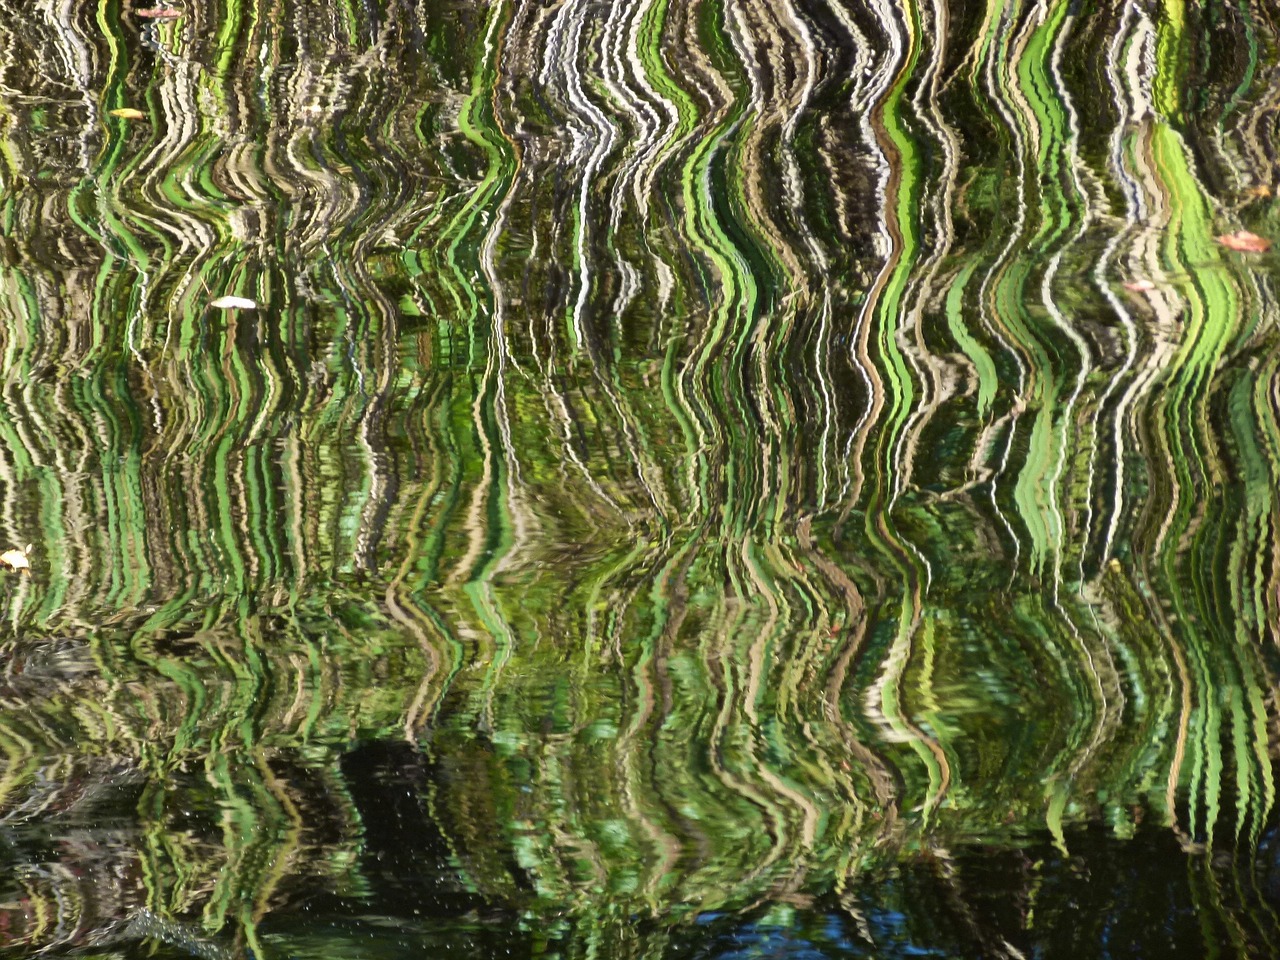 reflection distortion distorted free photo